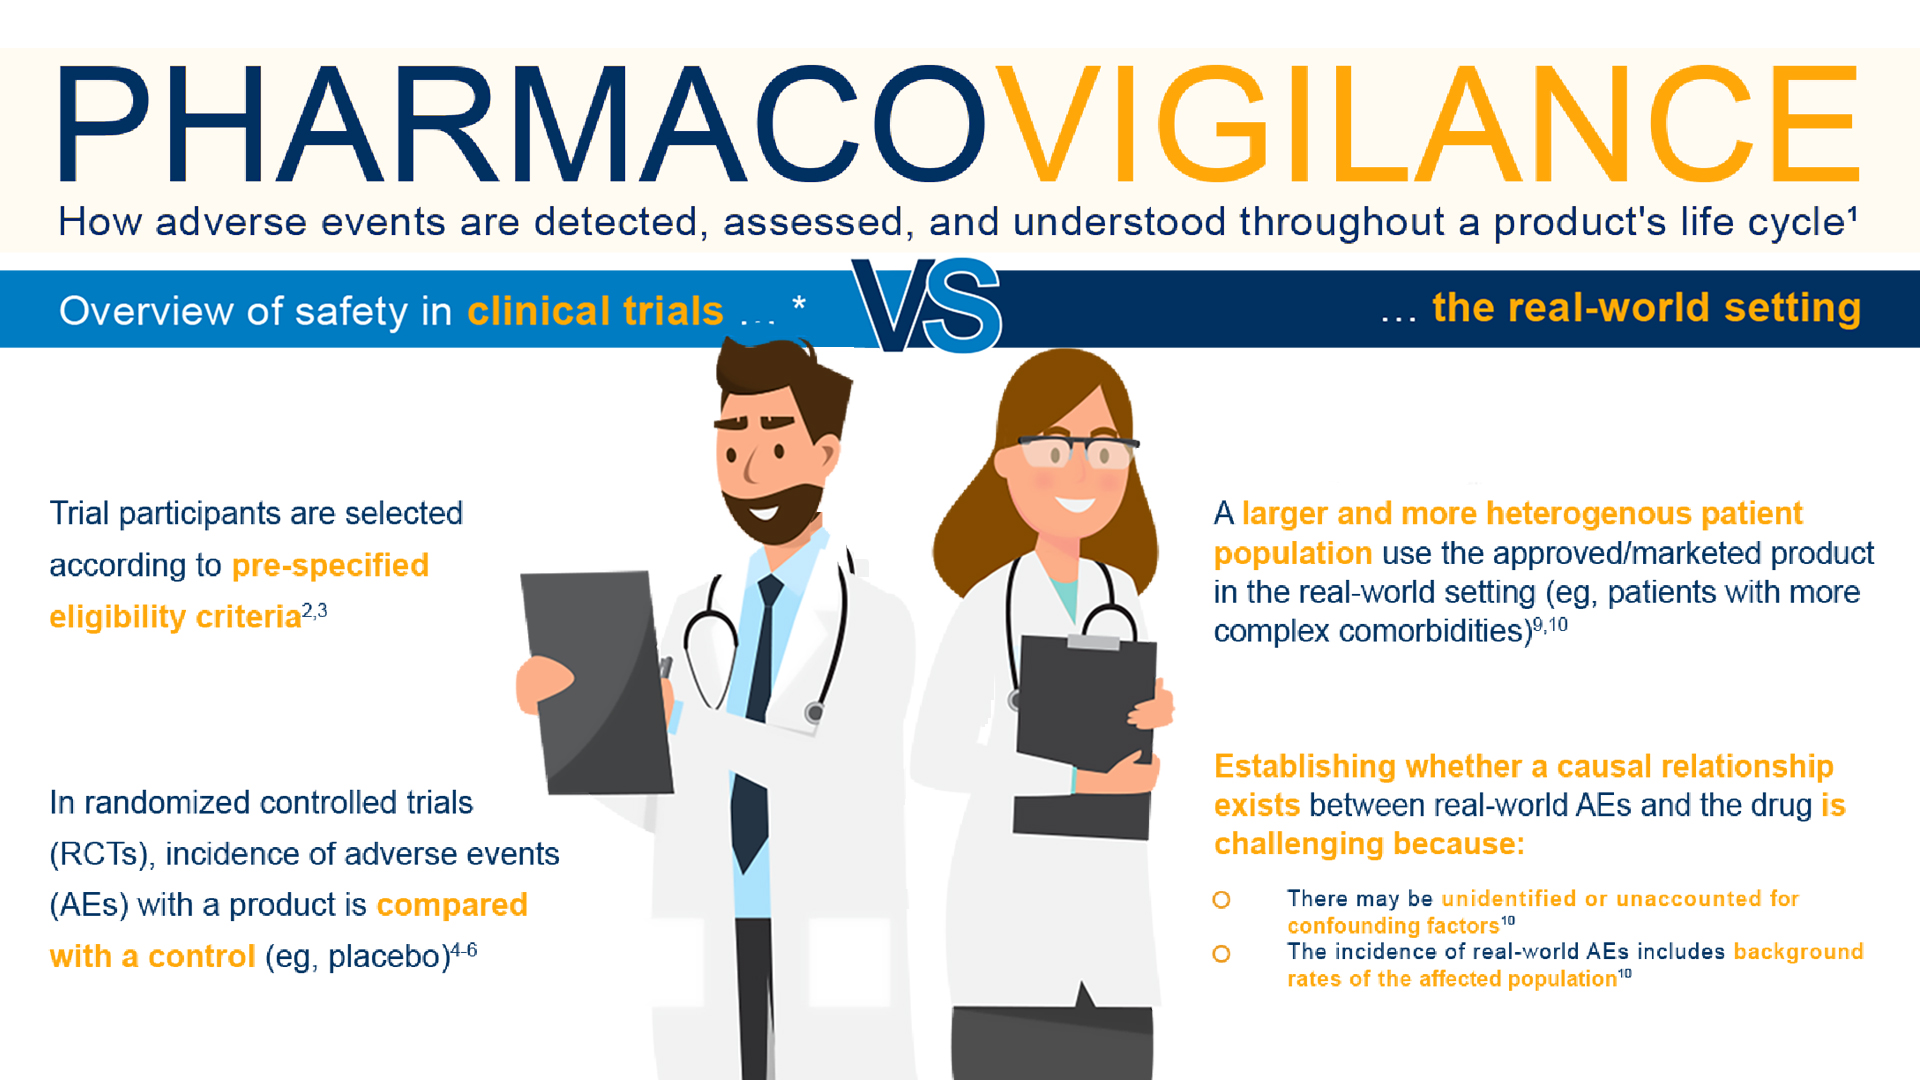 Pharmacovigilance: How Adverse Events Are Detected, Assessed, and Understood Throughout a Product's Life Cycle